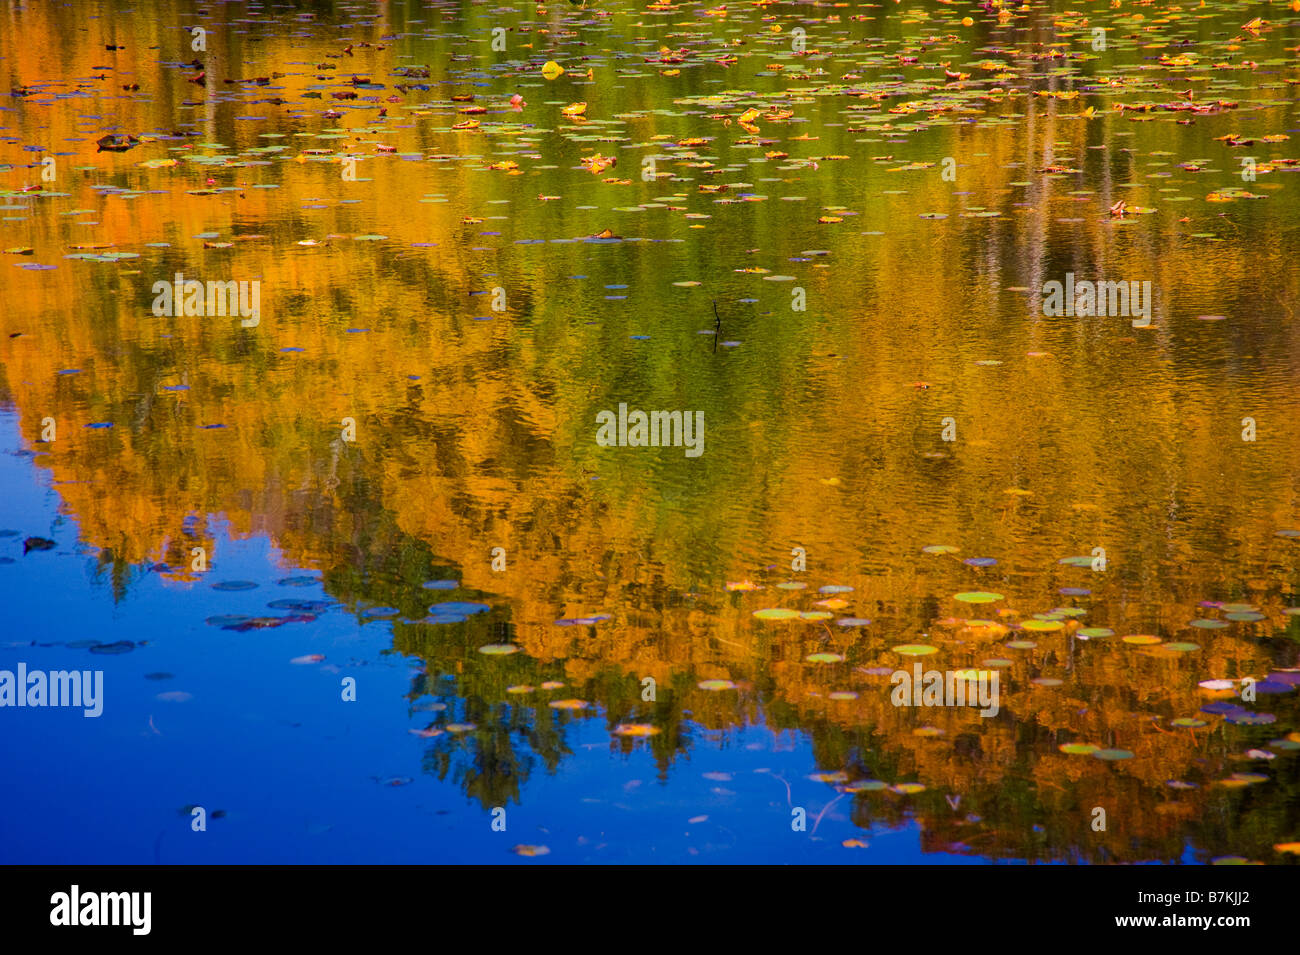 Herbst (Herbst) an Trout Lake, North Carolina, USA Stockfoto